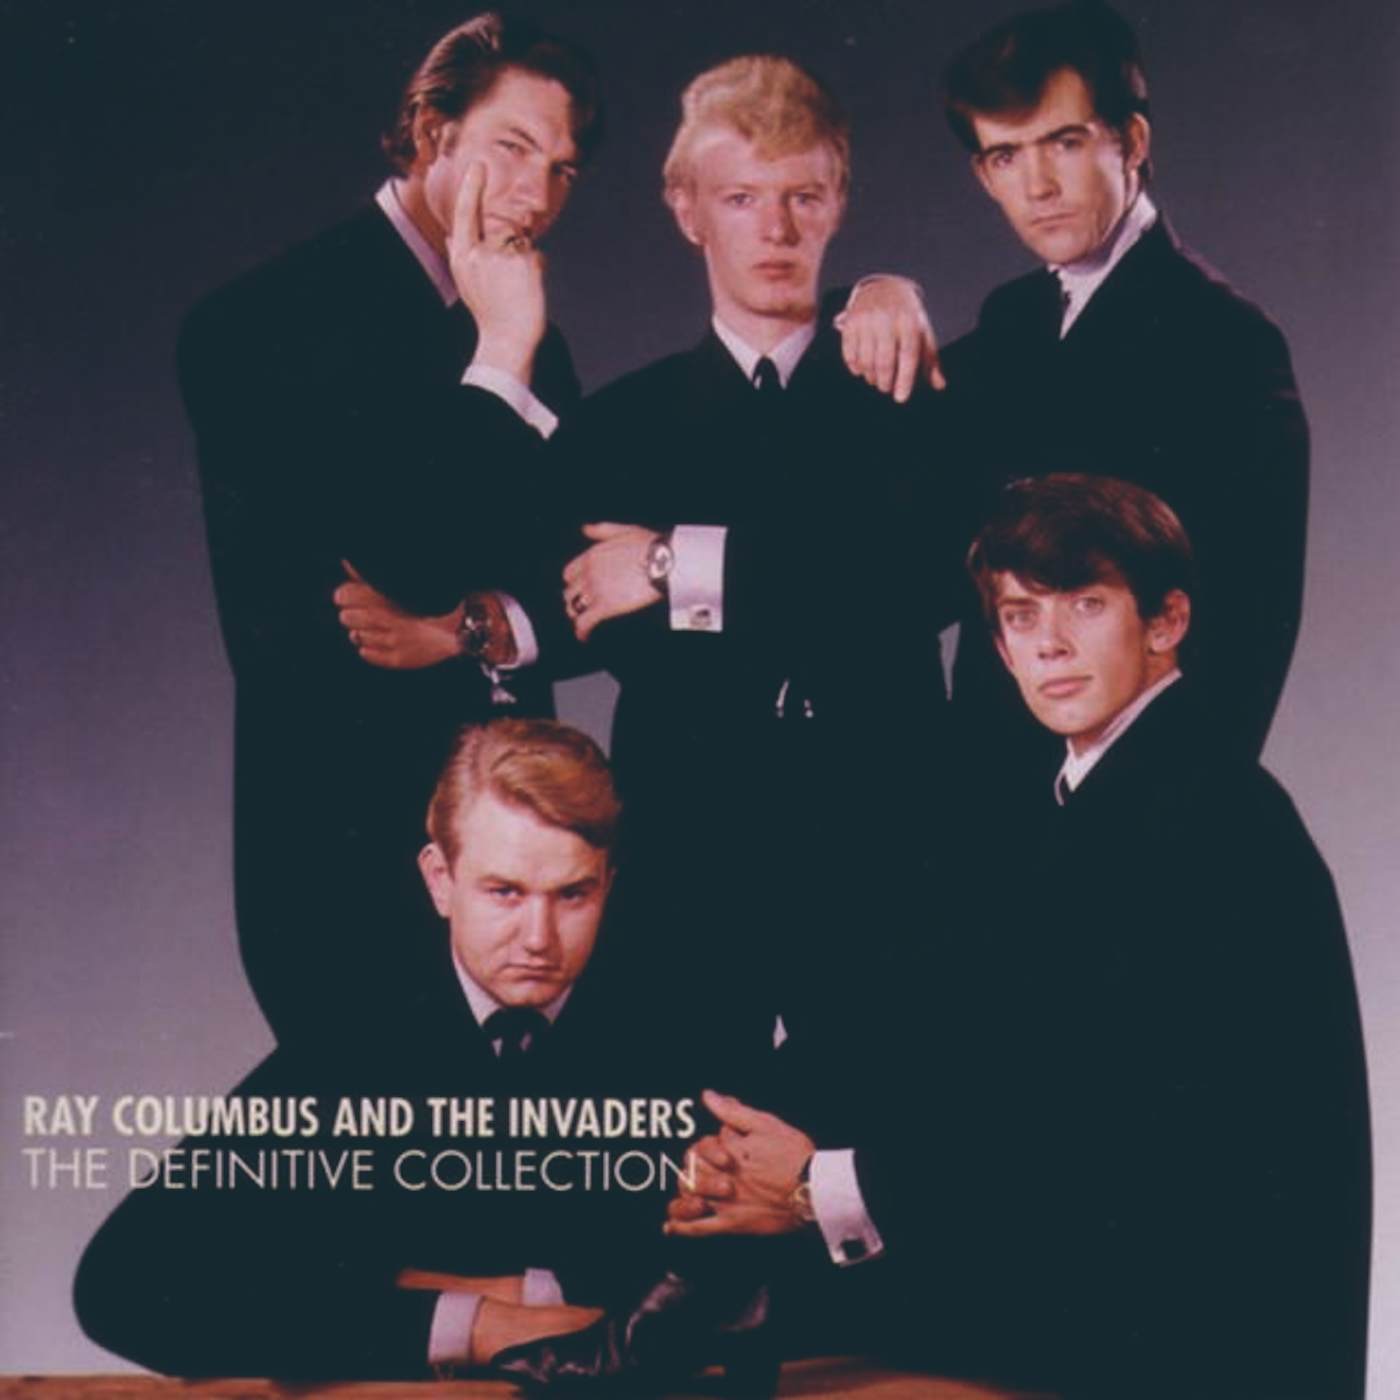 Ray Columbus and the Invaders